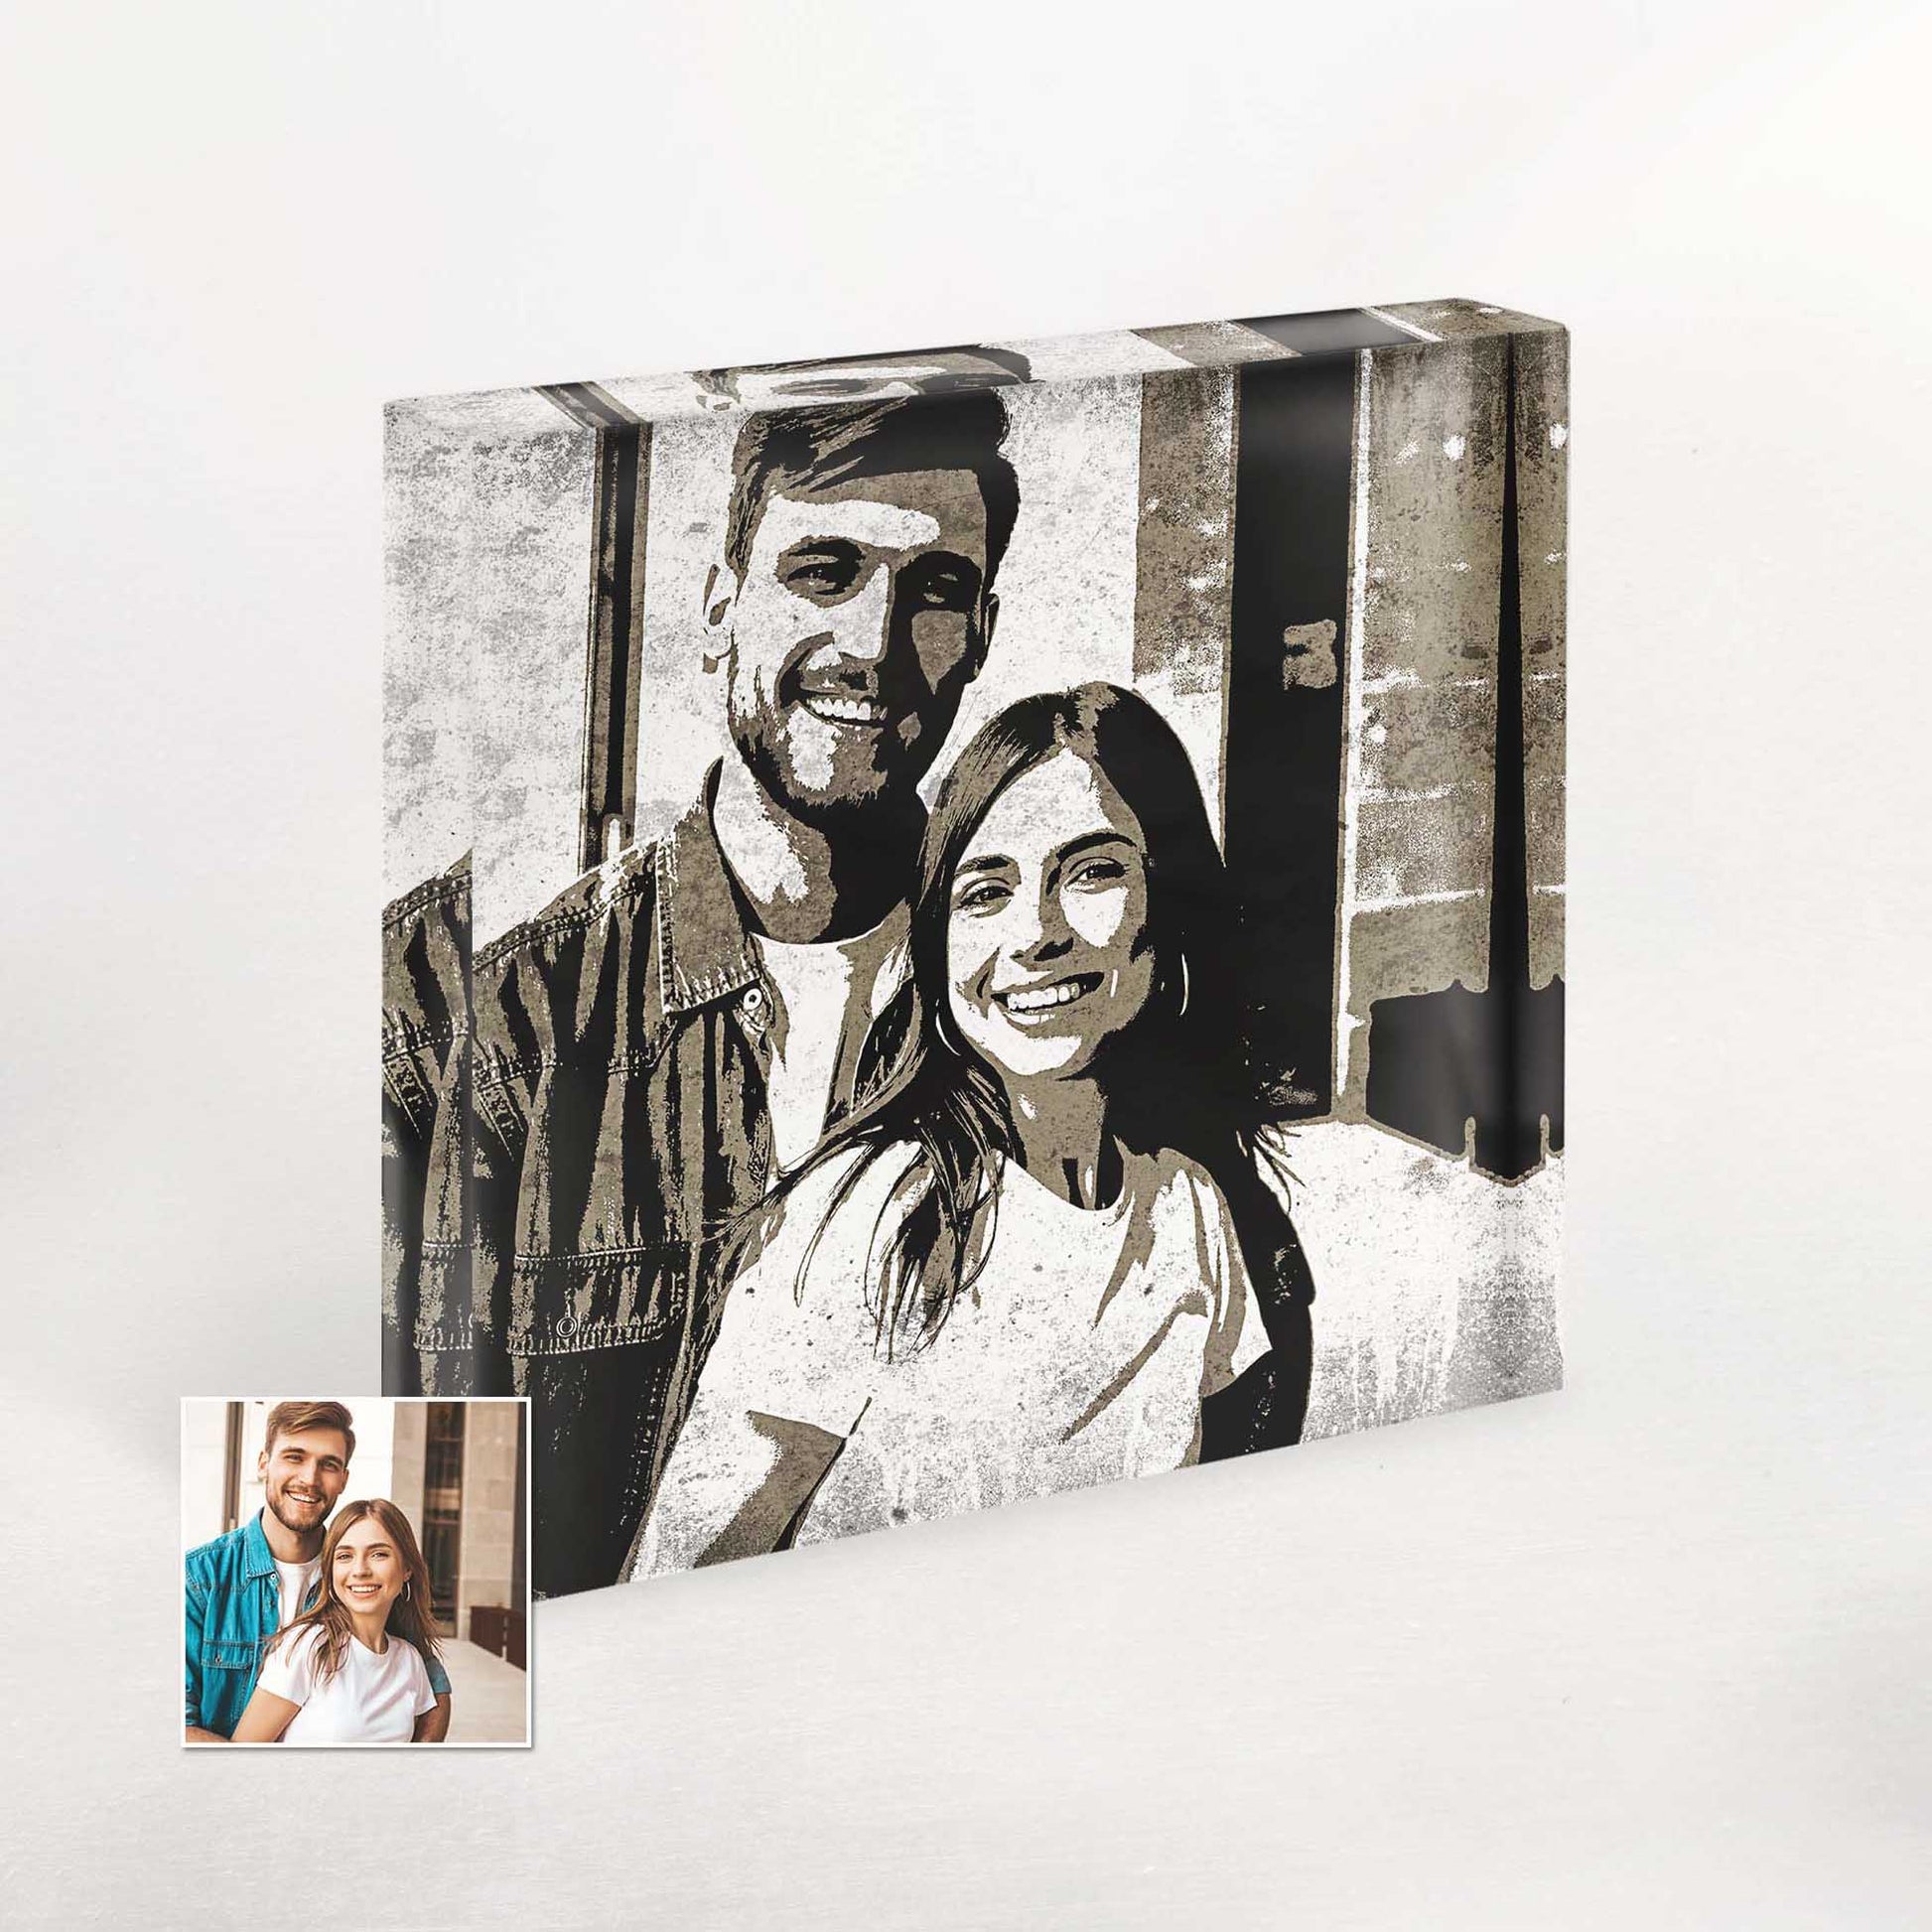 Elevate Your Home Decor: Personalised Black and White Street Art Acrylic Block Photo. Create a stylish and minimalist ambiance with our chic acrylic block photos. The black and white street art design